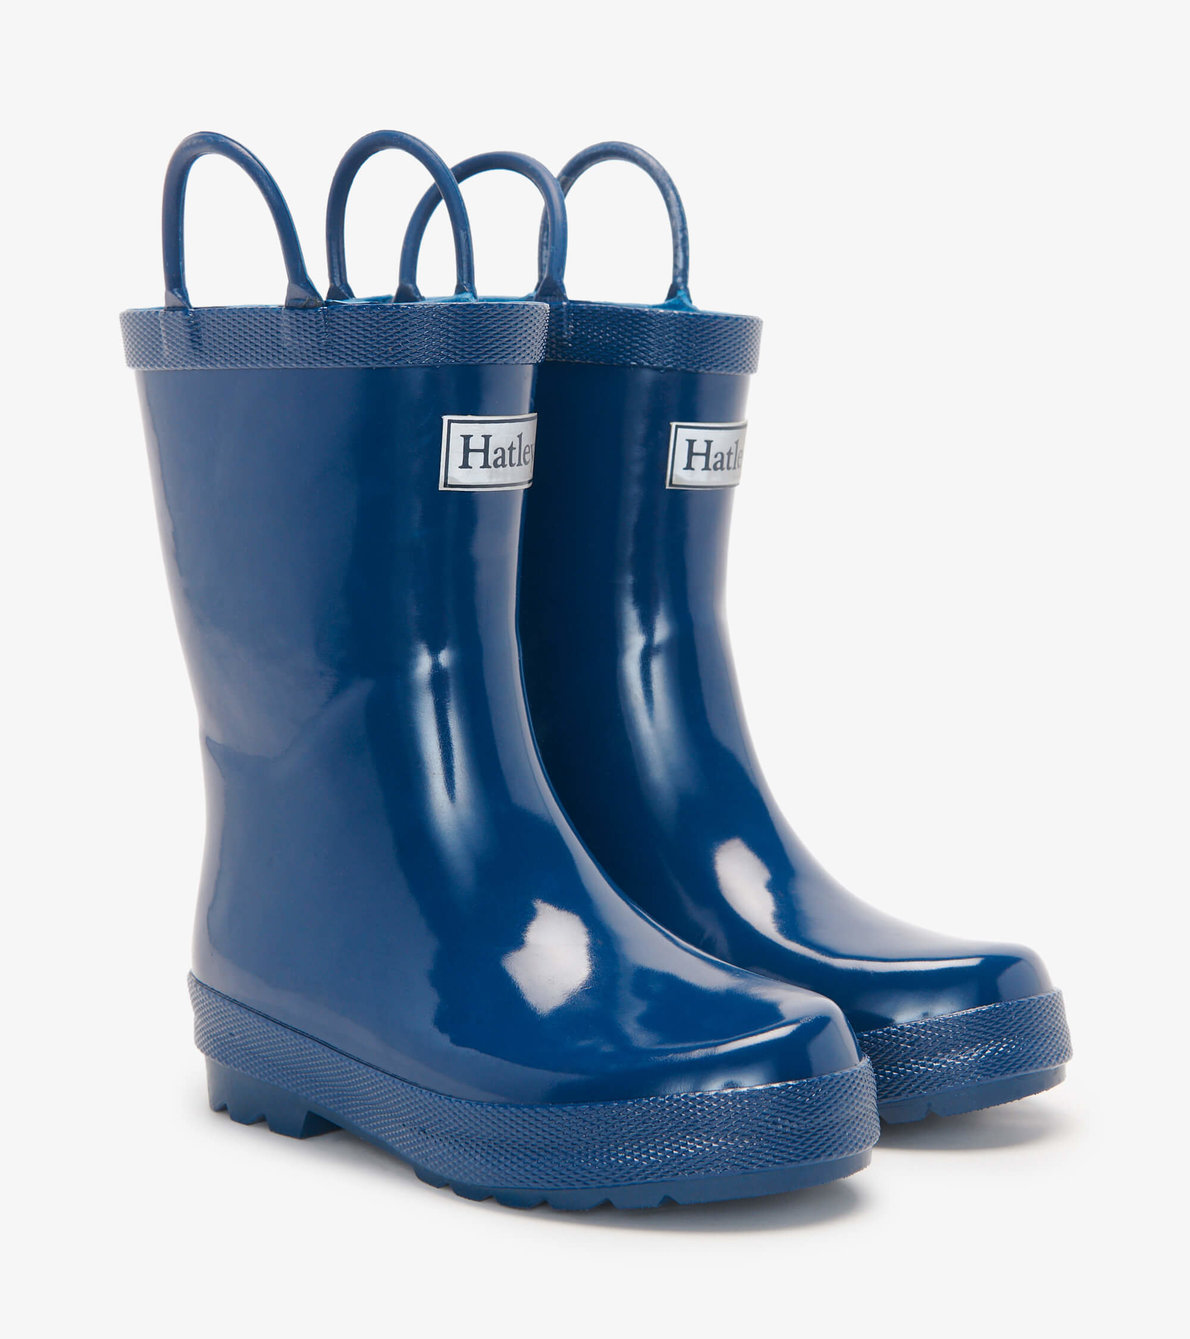 View larger image of Navy Shiny Wellies